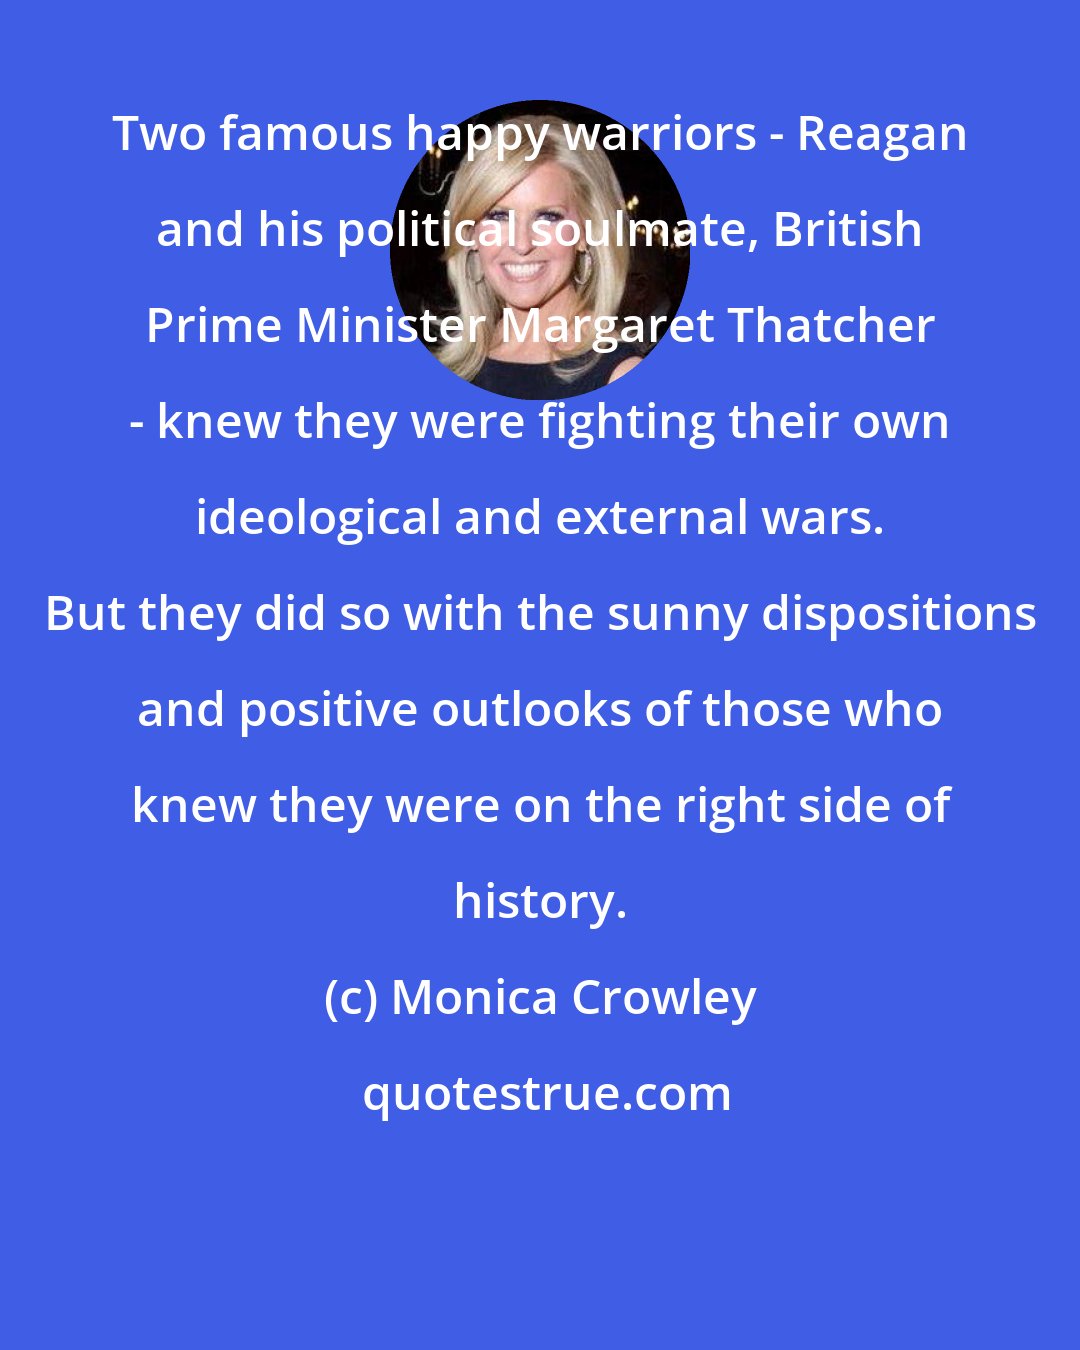 Monica Crowley: Two famous happy warriors - Reagan and his political soulmate, British Prime Minister Margaret Thatcher - knew they were fighting their own ideological and external wars. But they did so with the sunny dispositions and positive outlooks of those who knew they were on the right side of history.